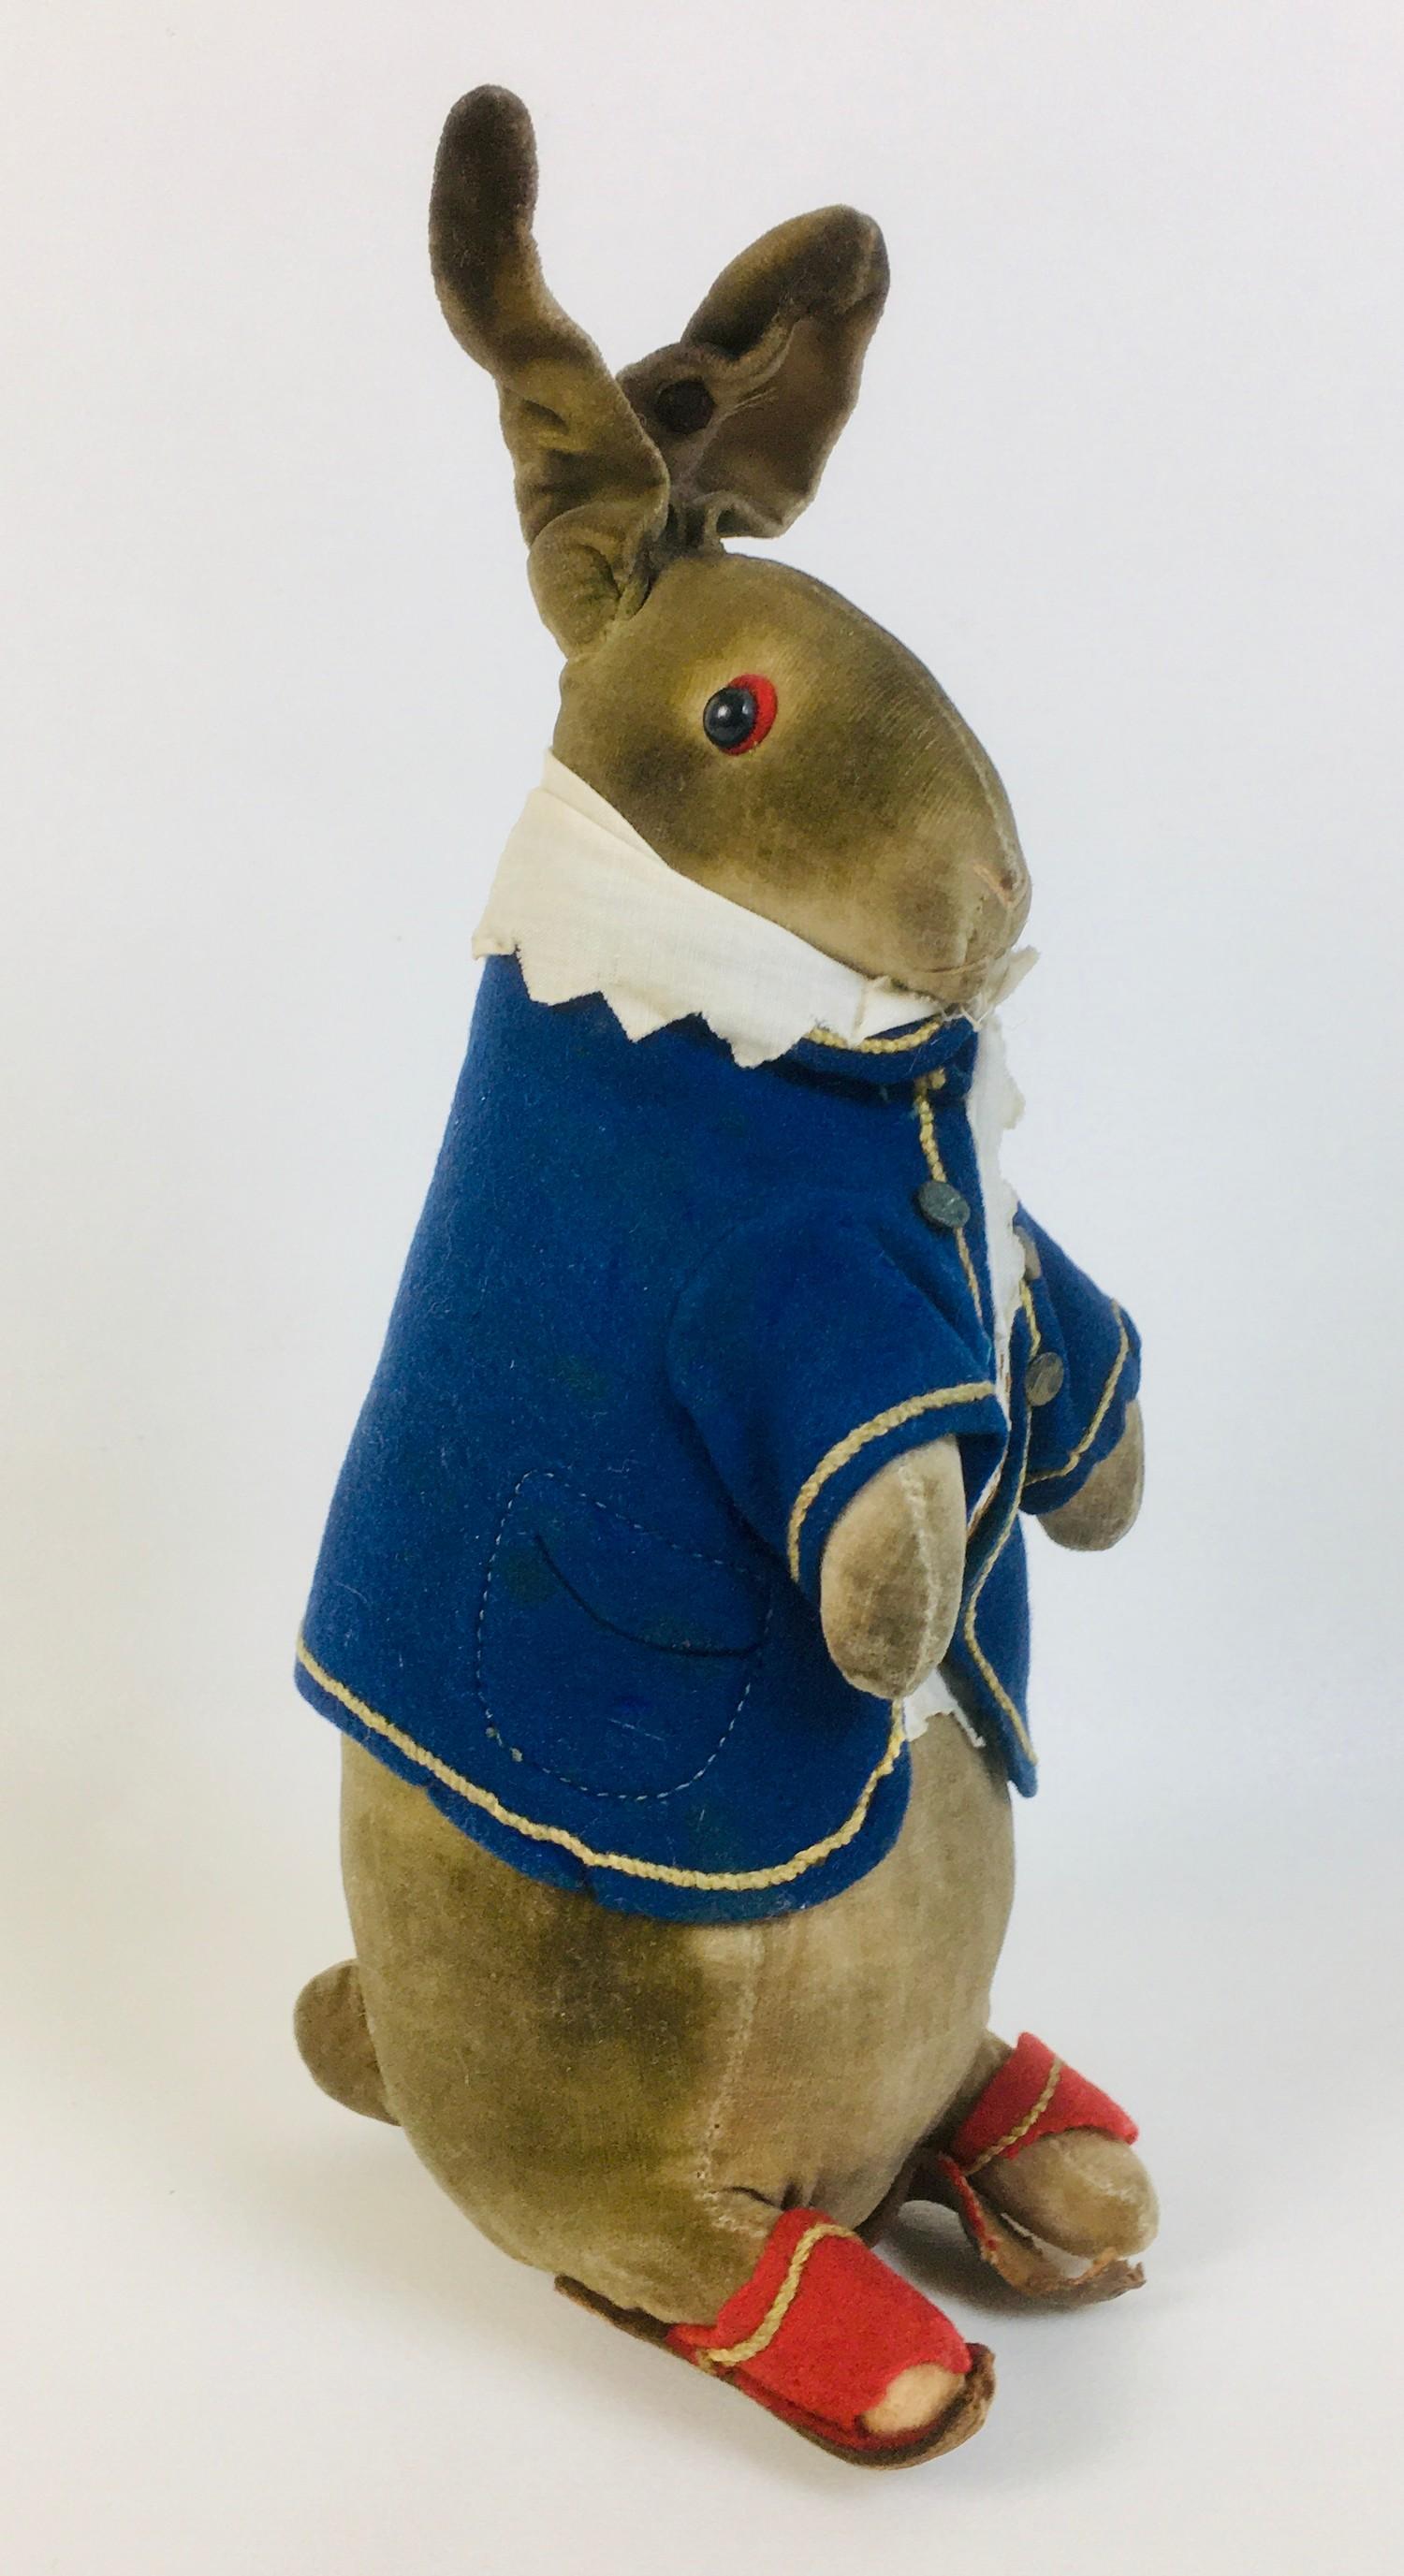 An early 20th century Steiff soft toy of Beatrix Potter's Peter Rabbit, with a white shirt - Image 4 of 11